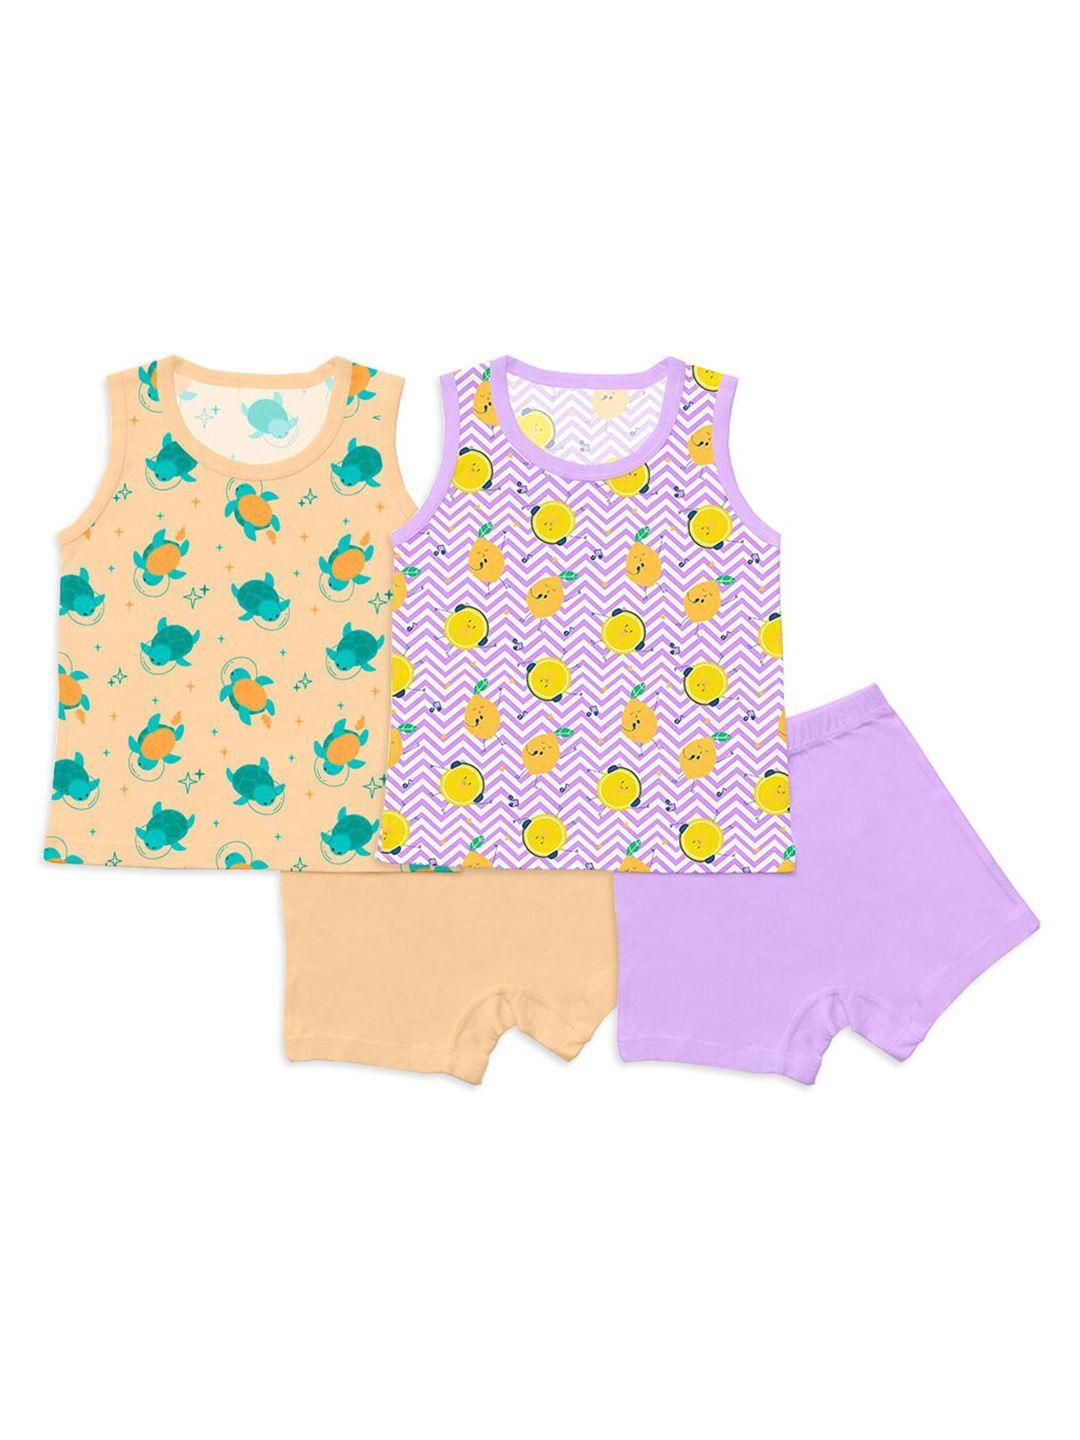 superbottoms unisex kids lavender & peach-coloured printed set of 2 sustainable co-ord set